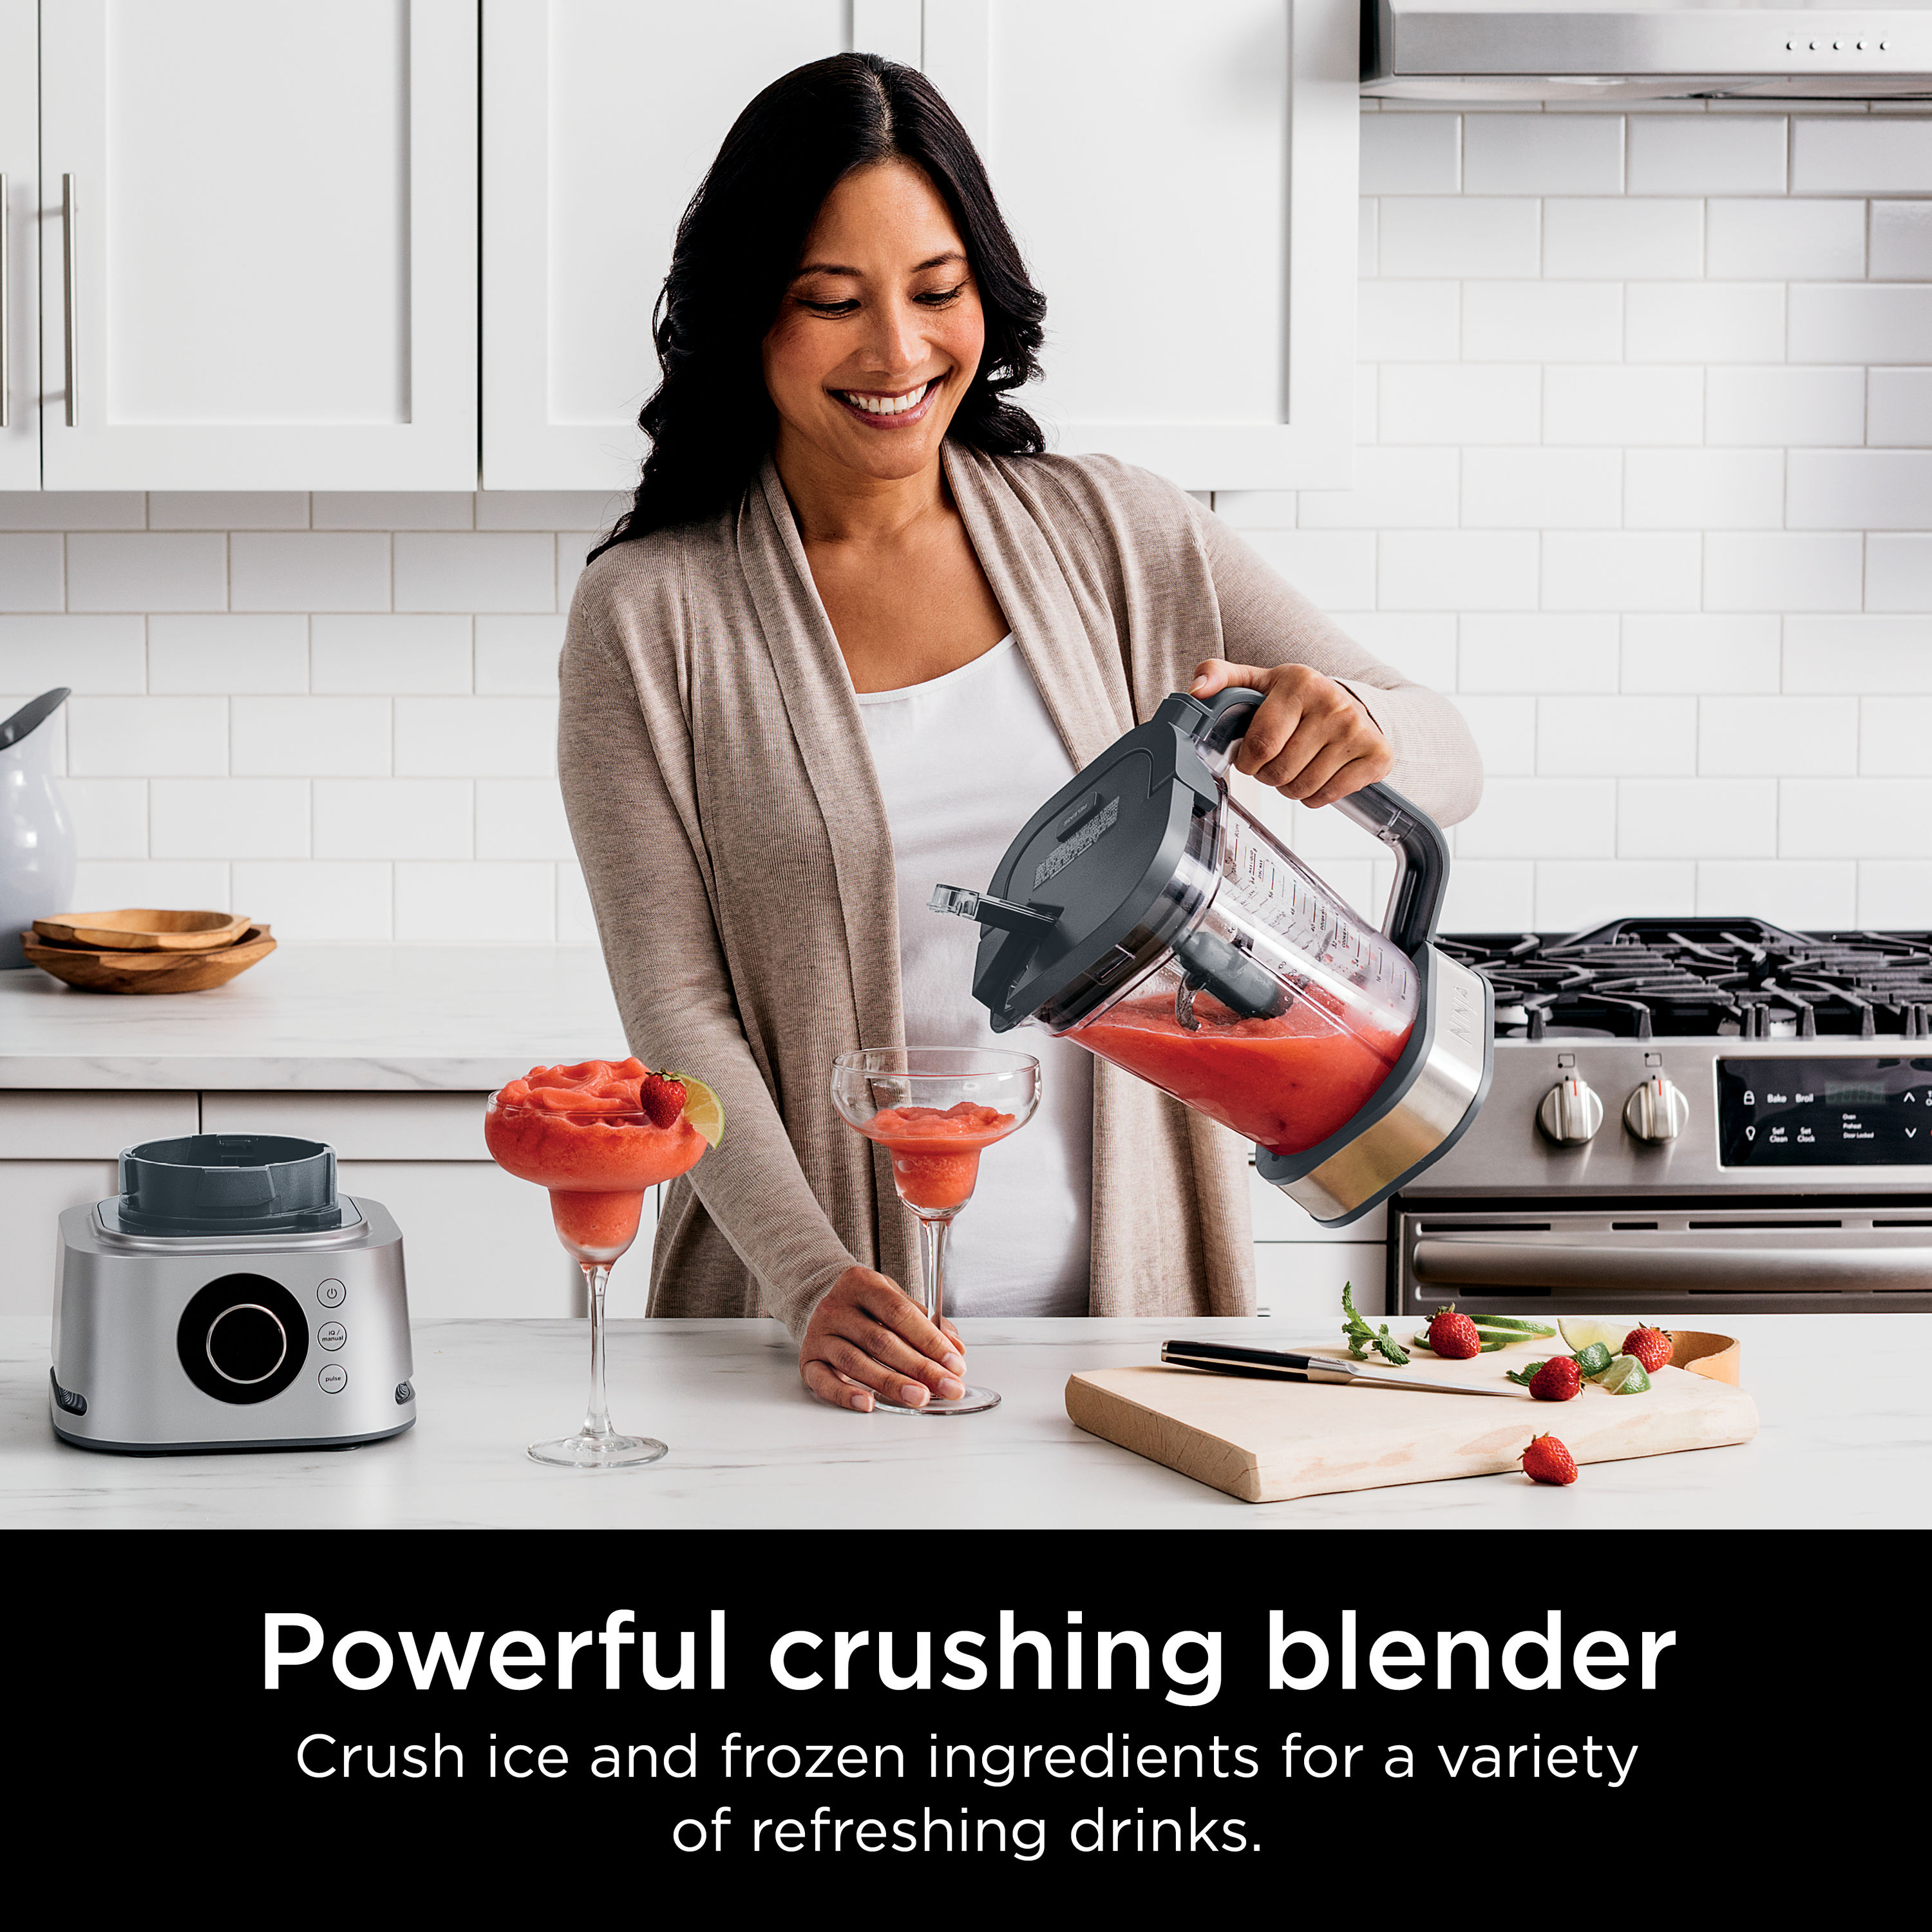 Ninja® Foodi® Power Blender & Processor System with Smoothie Bowl Maker and  Nutrient Extractor + 4in1 Blender 1400WP